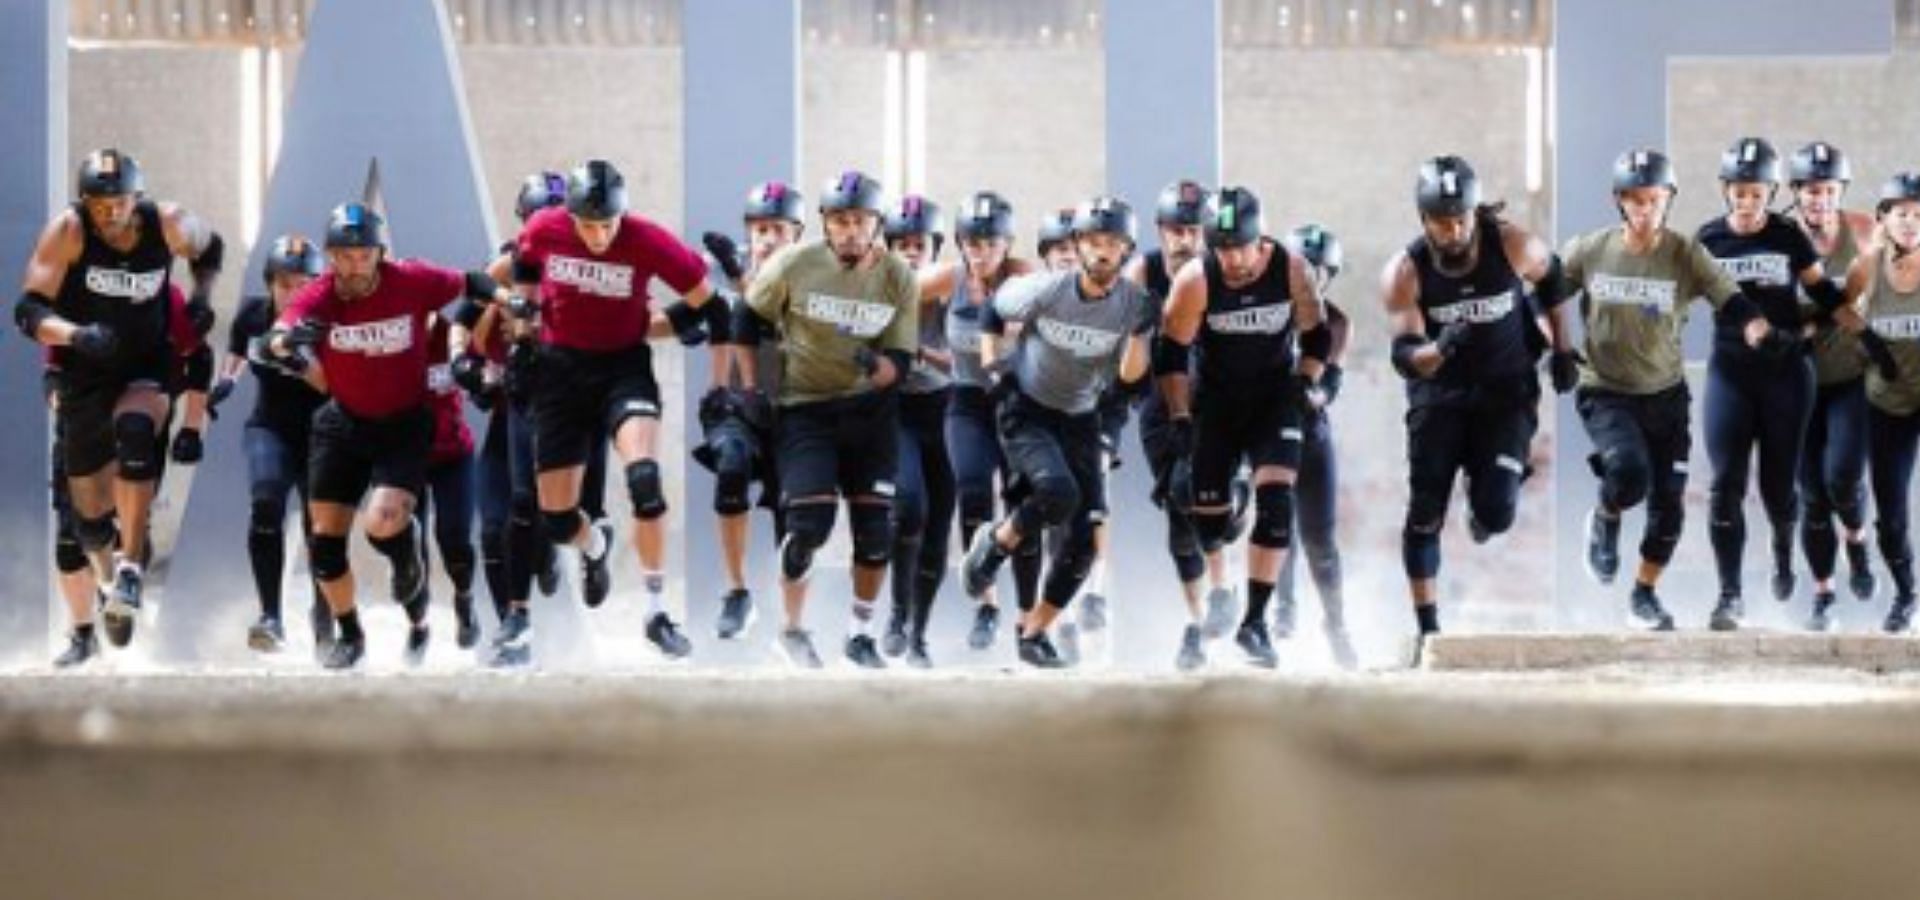 A diverse cast is set to make The Challenge Season 39 a season to remember (Image via Instagram/@thechallenge)